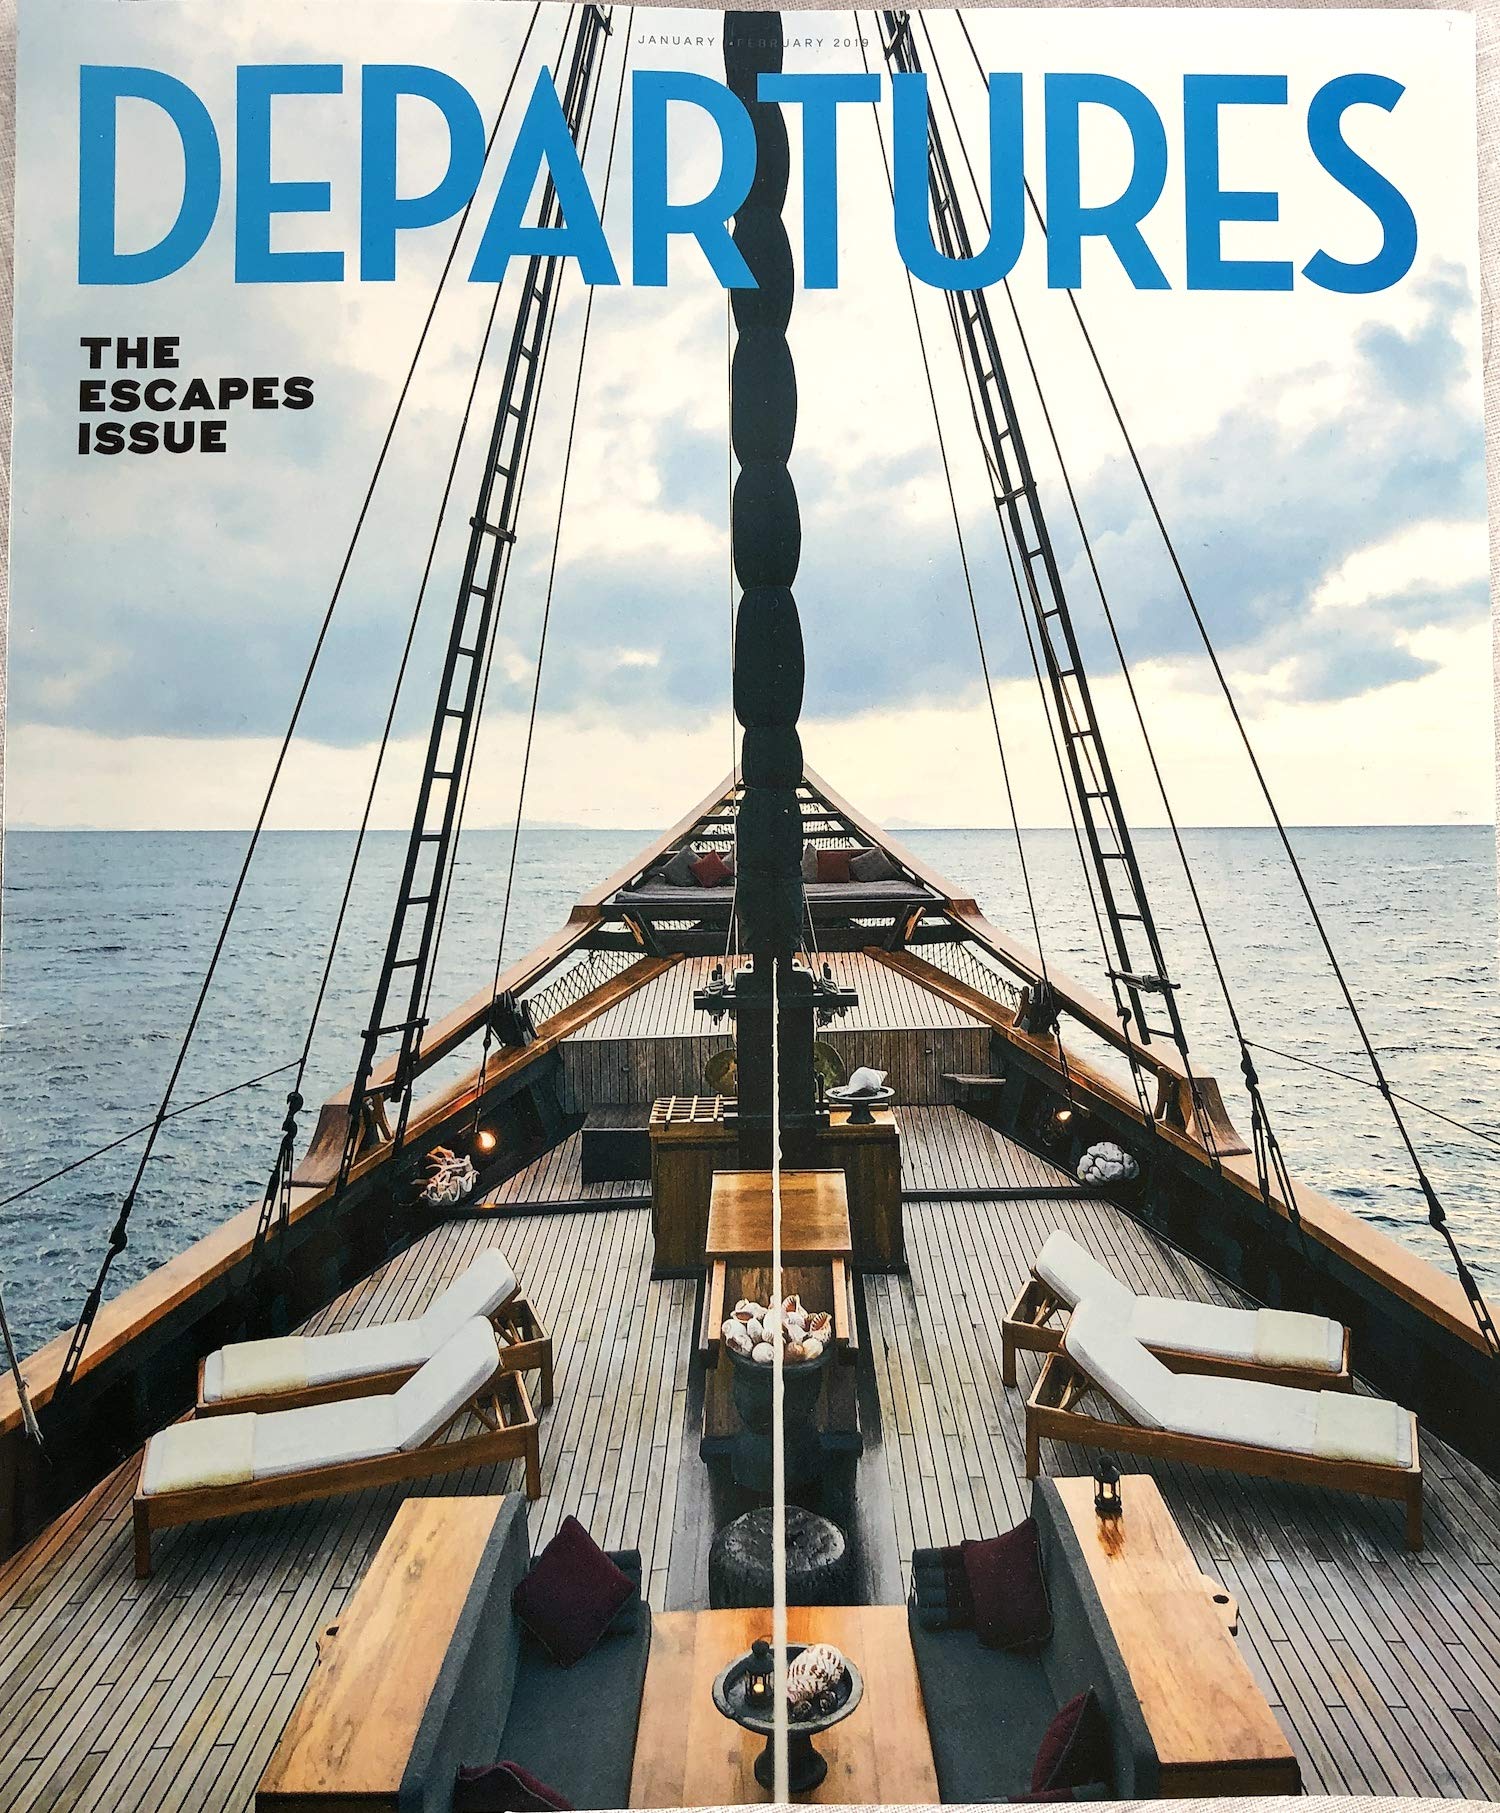 American Express Ends Print Editions of Departures and Centurion